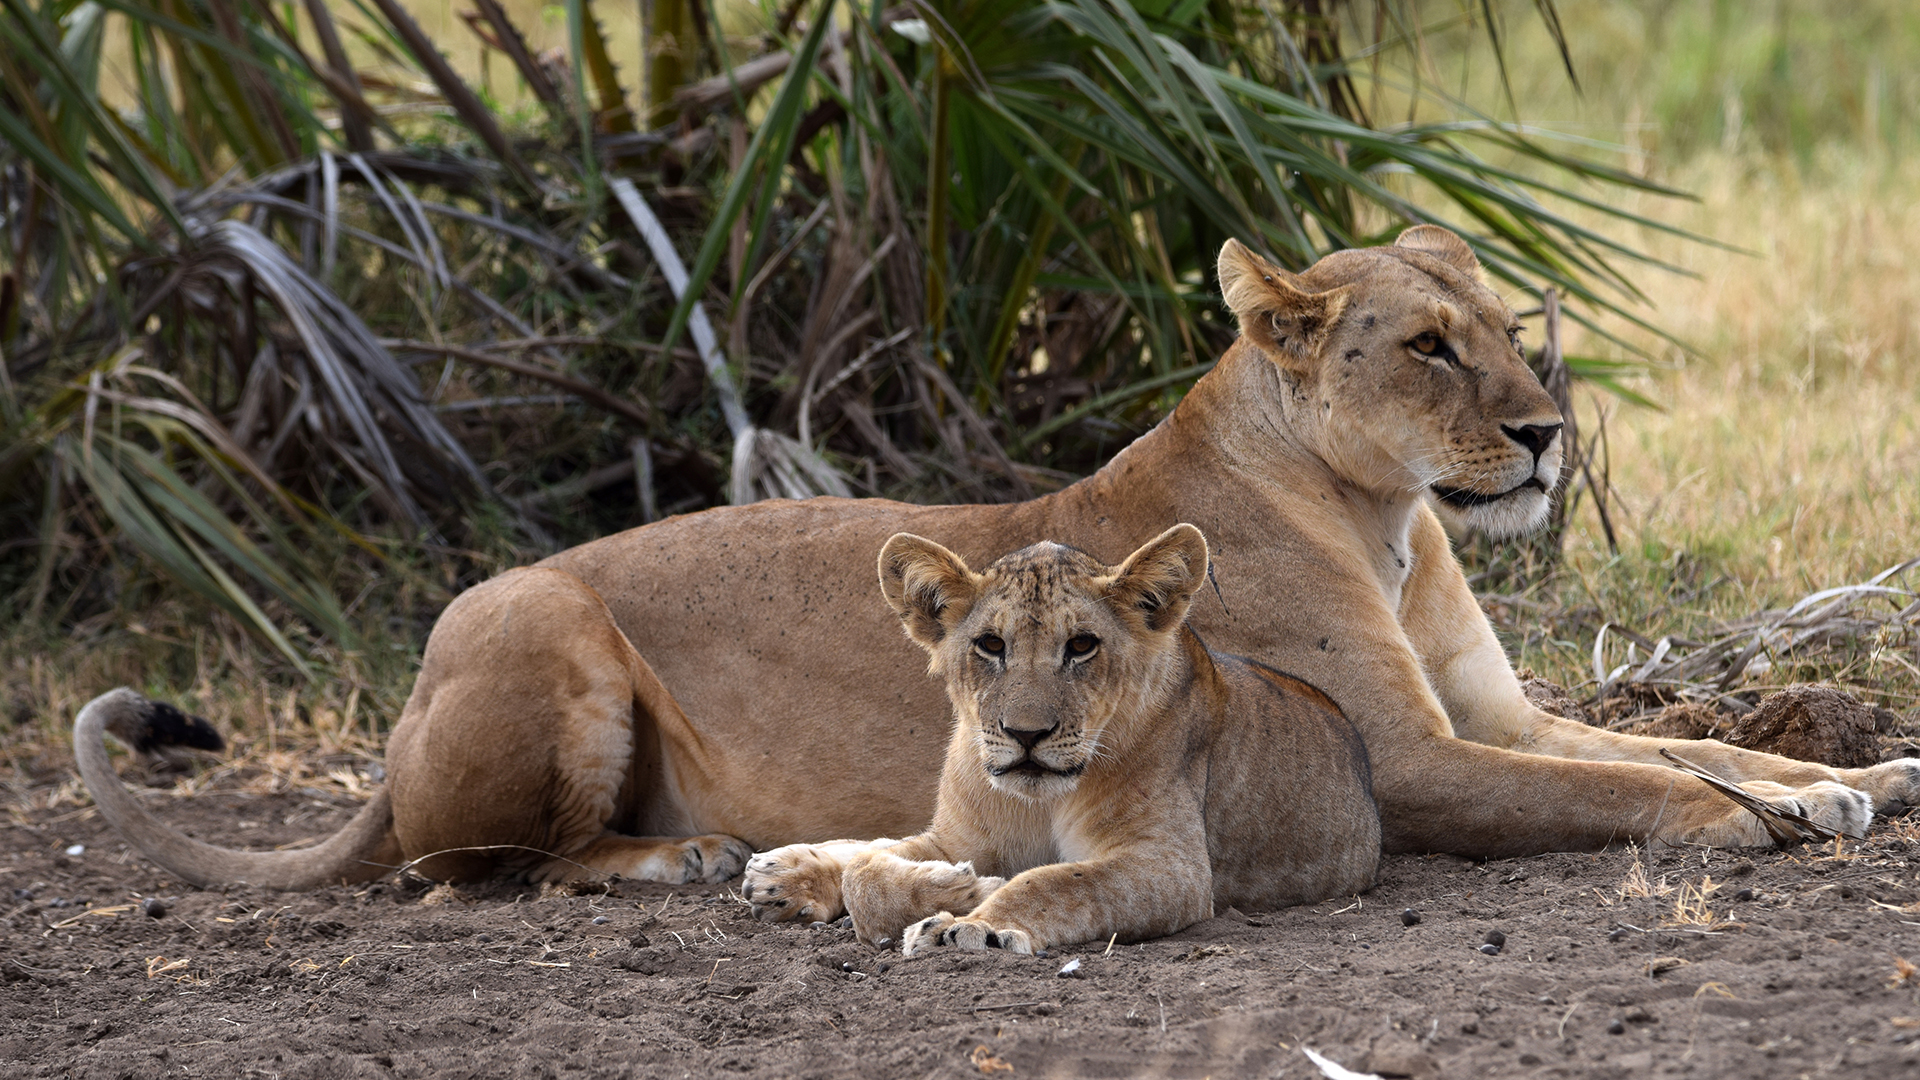 A lion cub sits in front of a lioness laying down